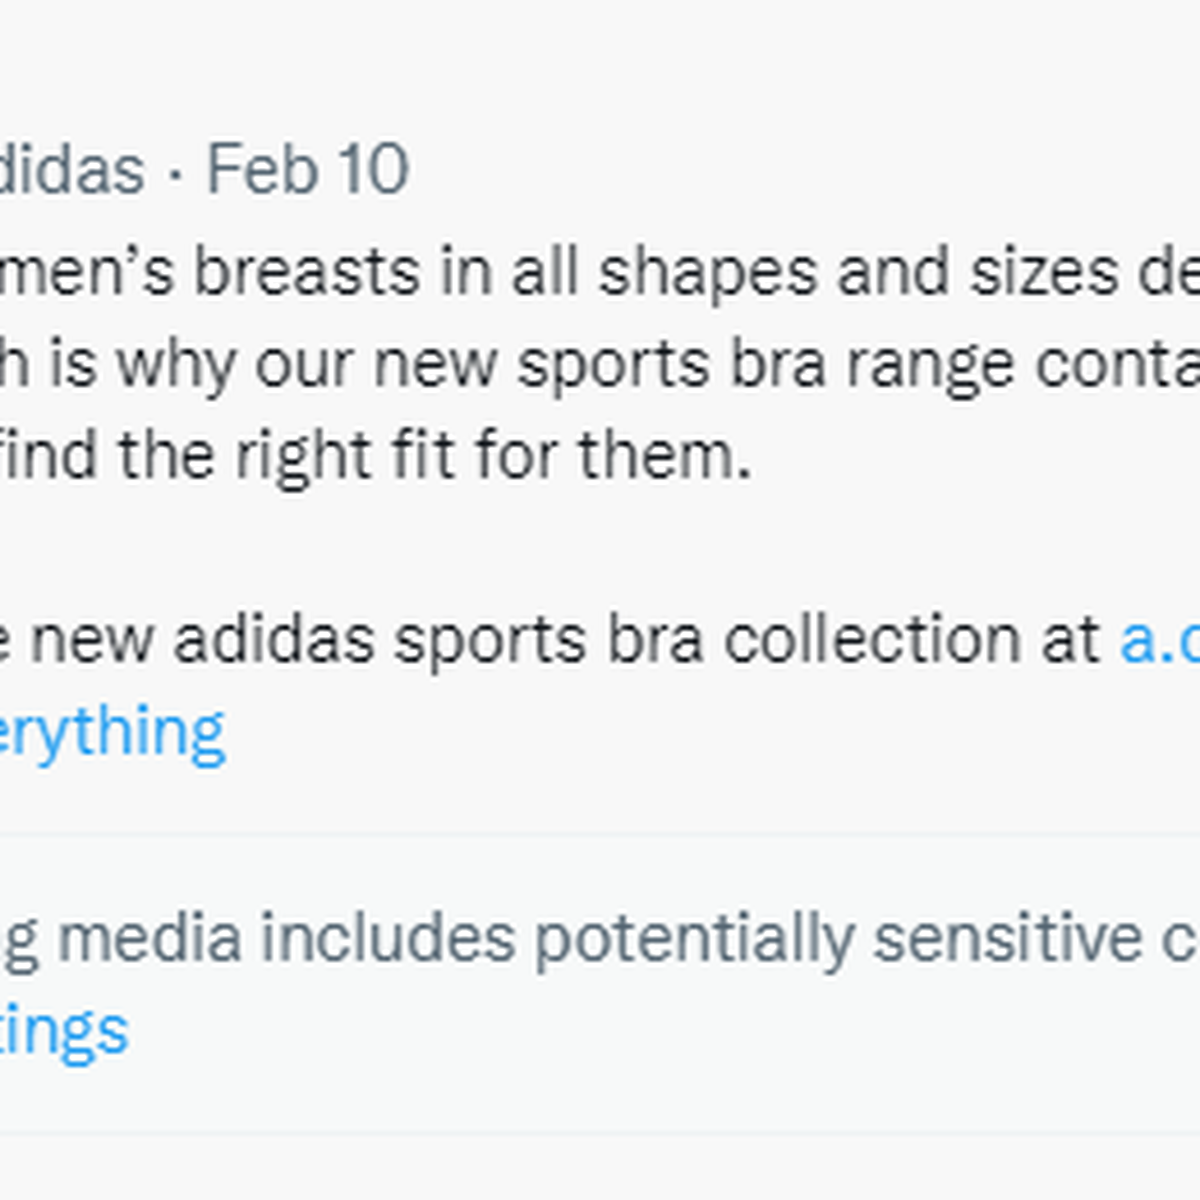 Adidas shows bare breasts in sports bra ad